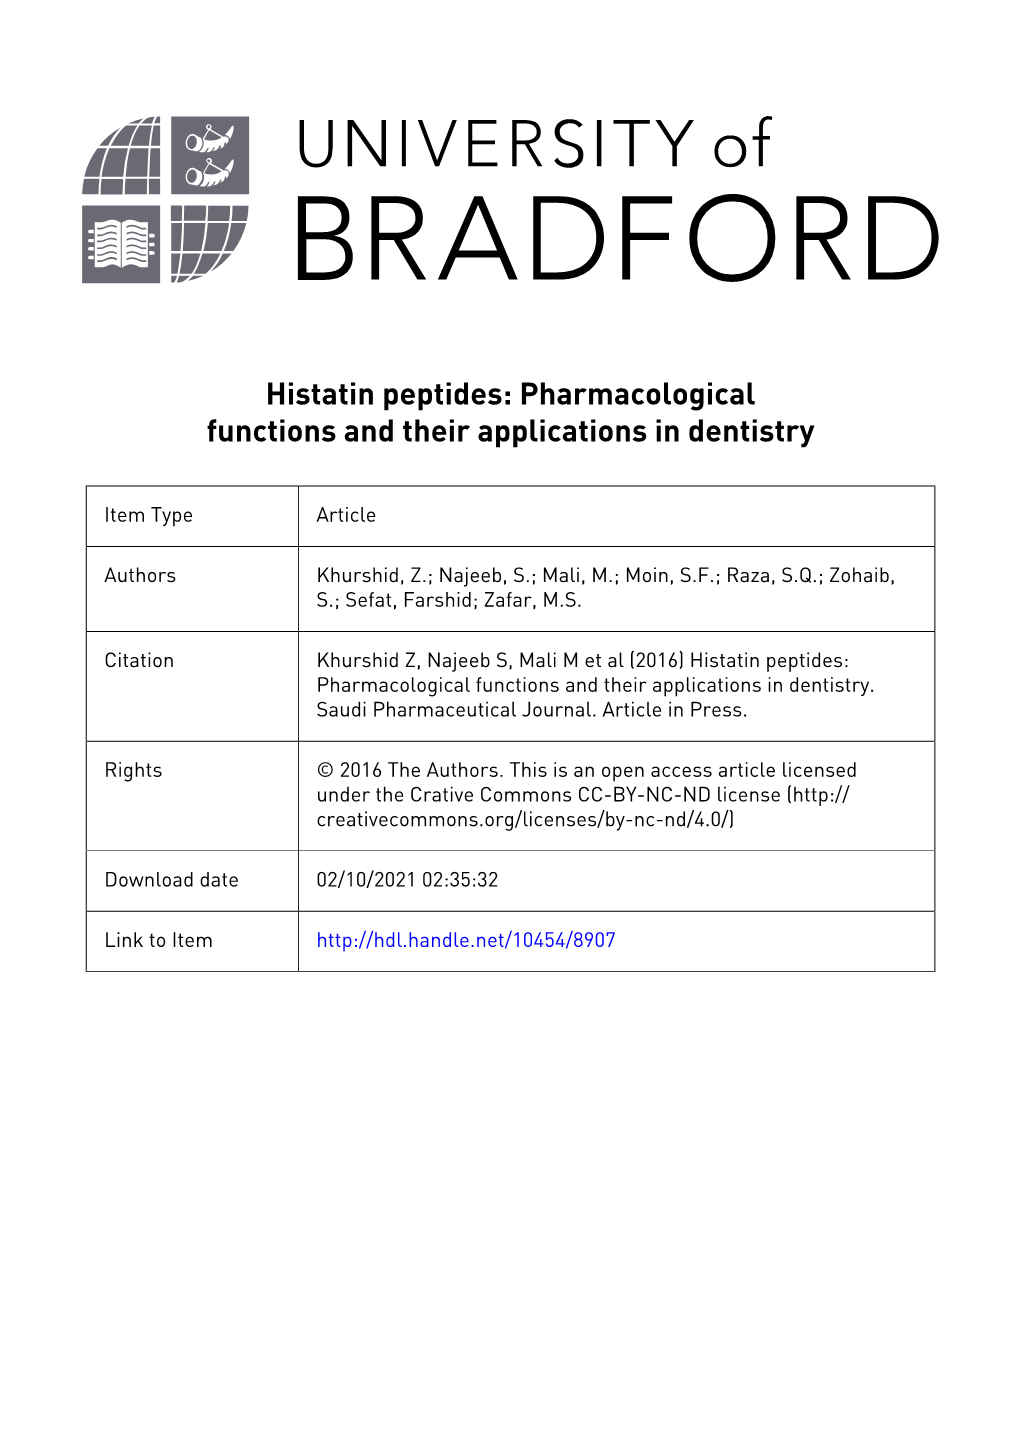 Histatin Peptides: Pharmacological Functions and Their Applications in Dentistry